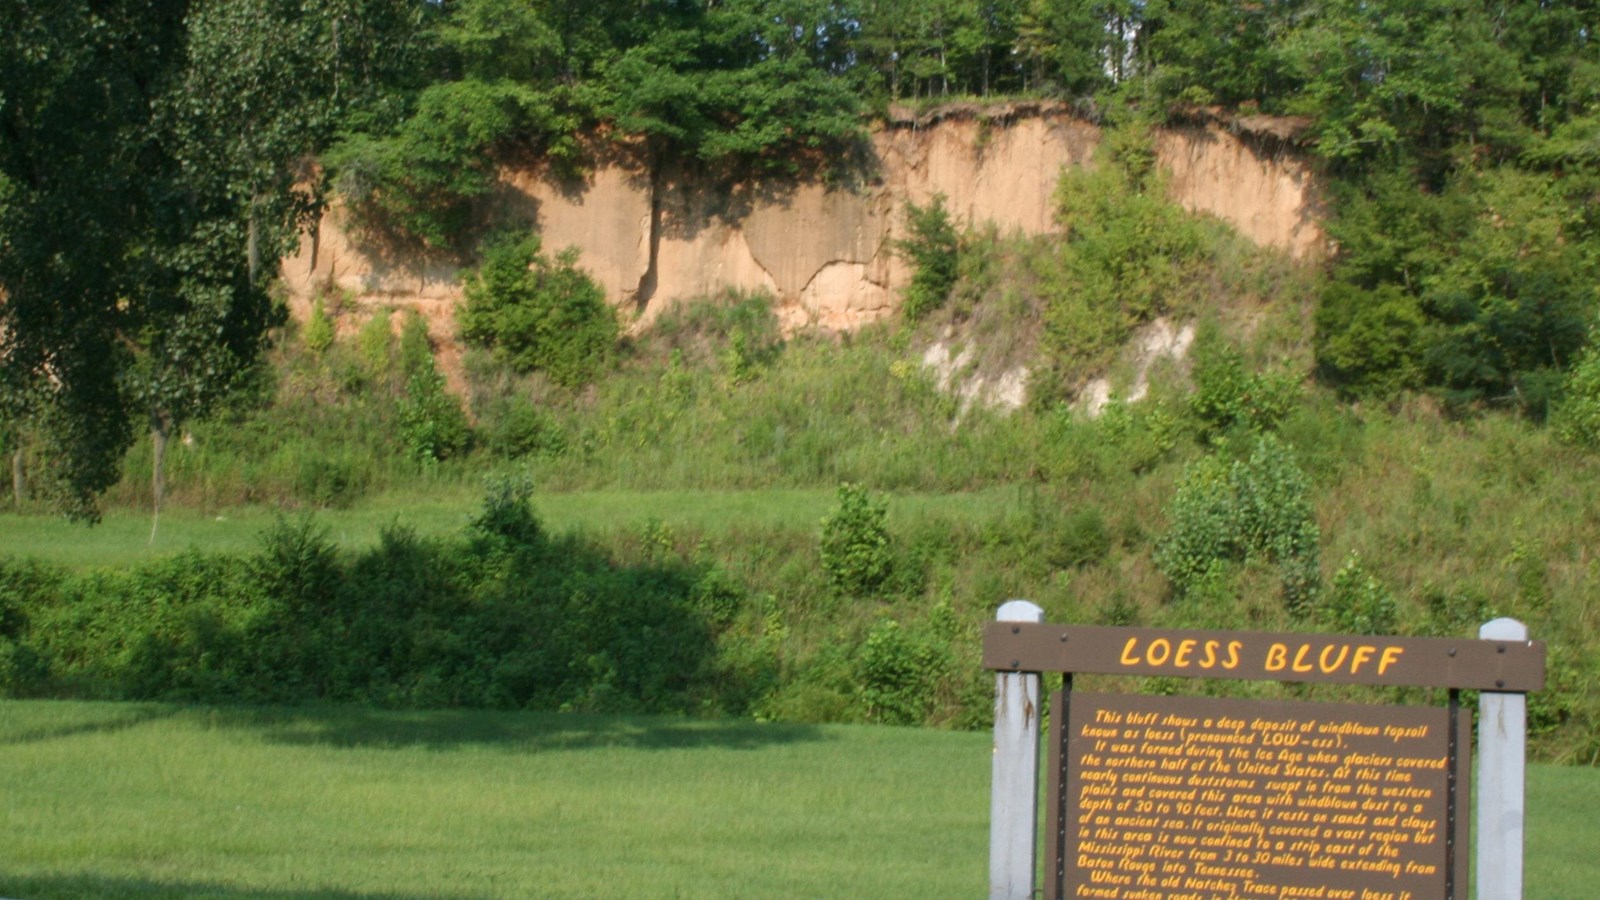 Brown painted sign with yellow letters with heading Loess Bluff is in the foreground with bluffs 